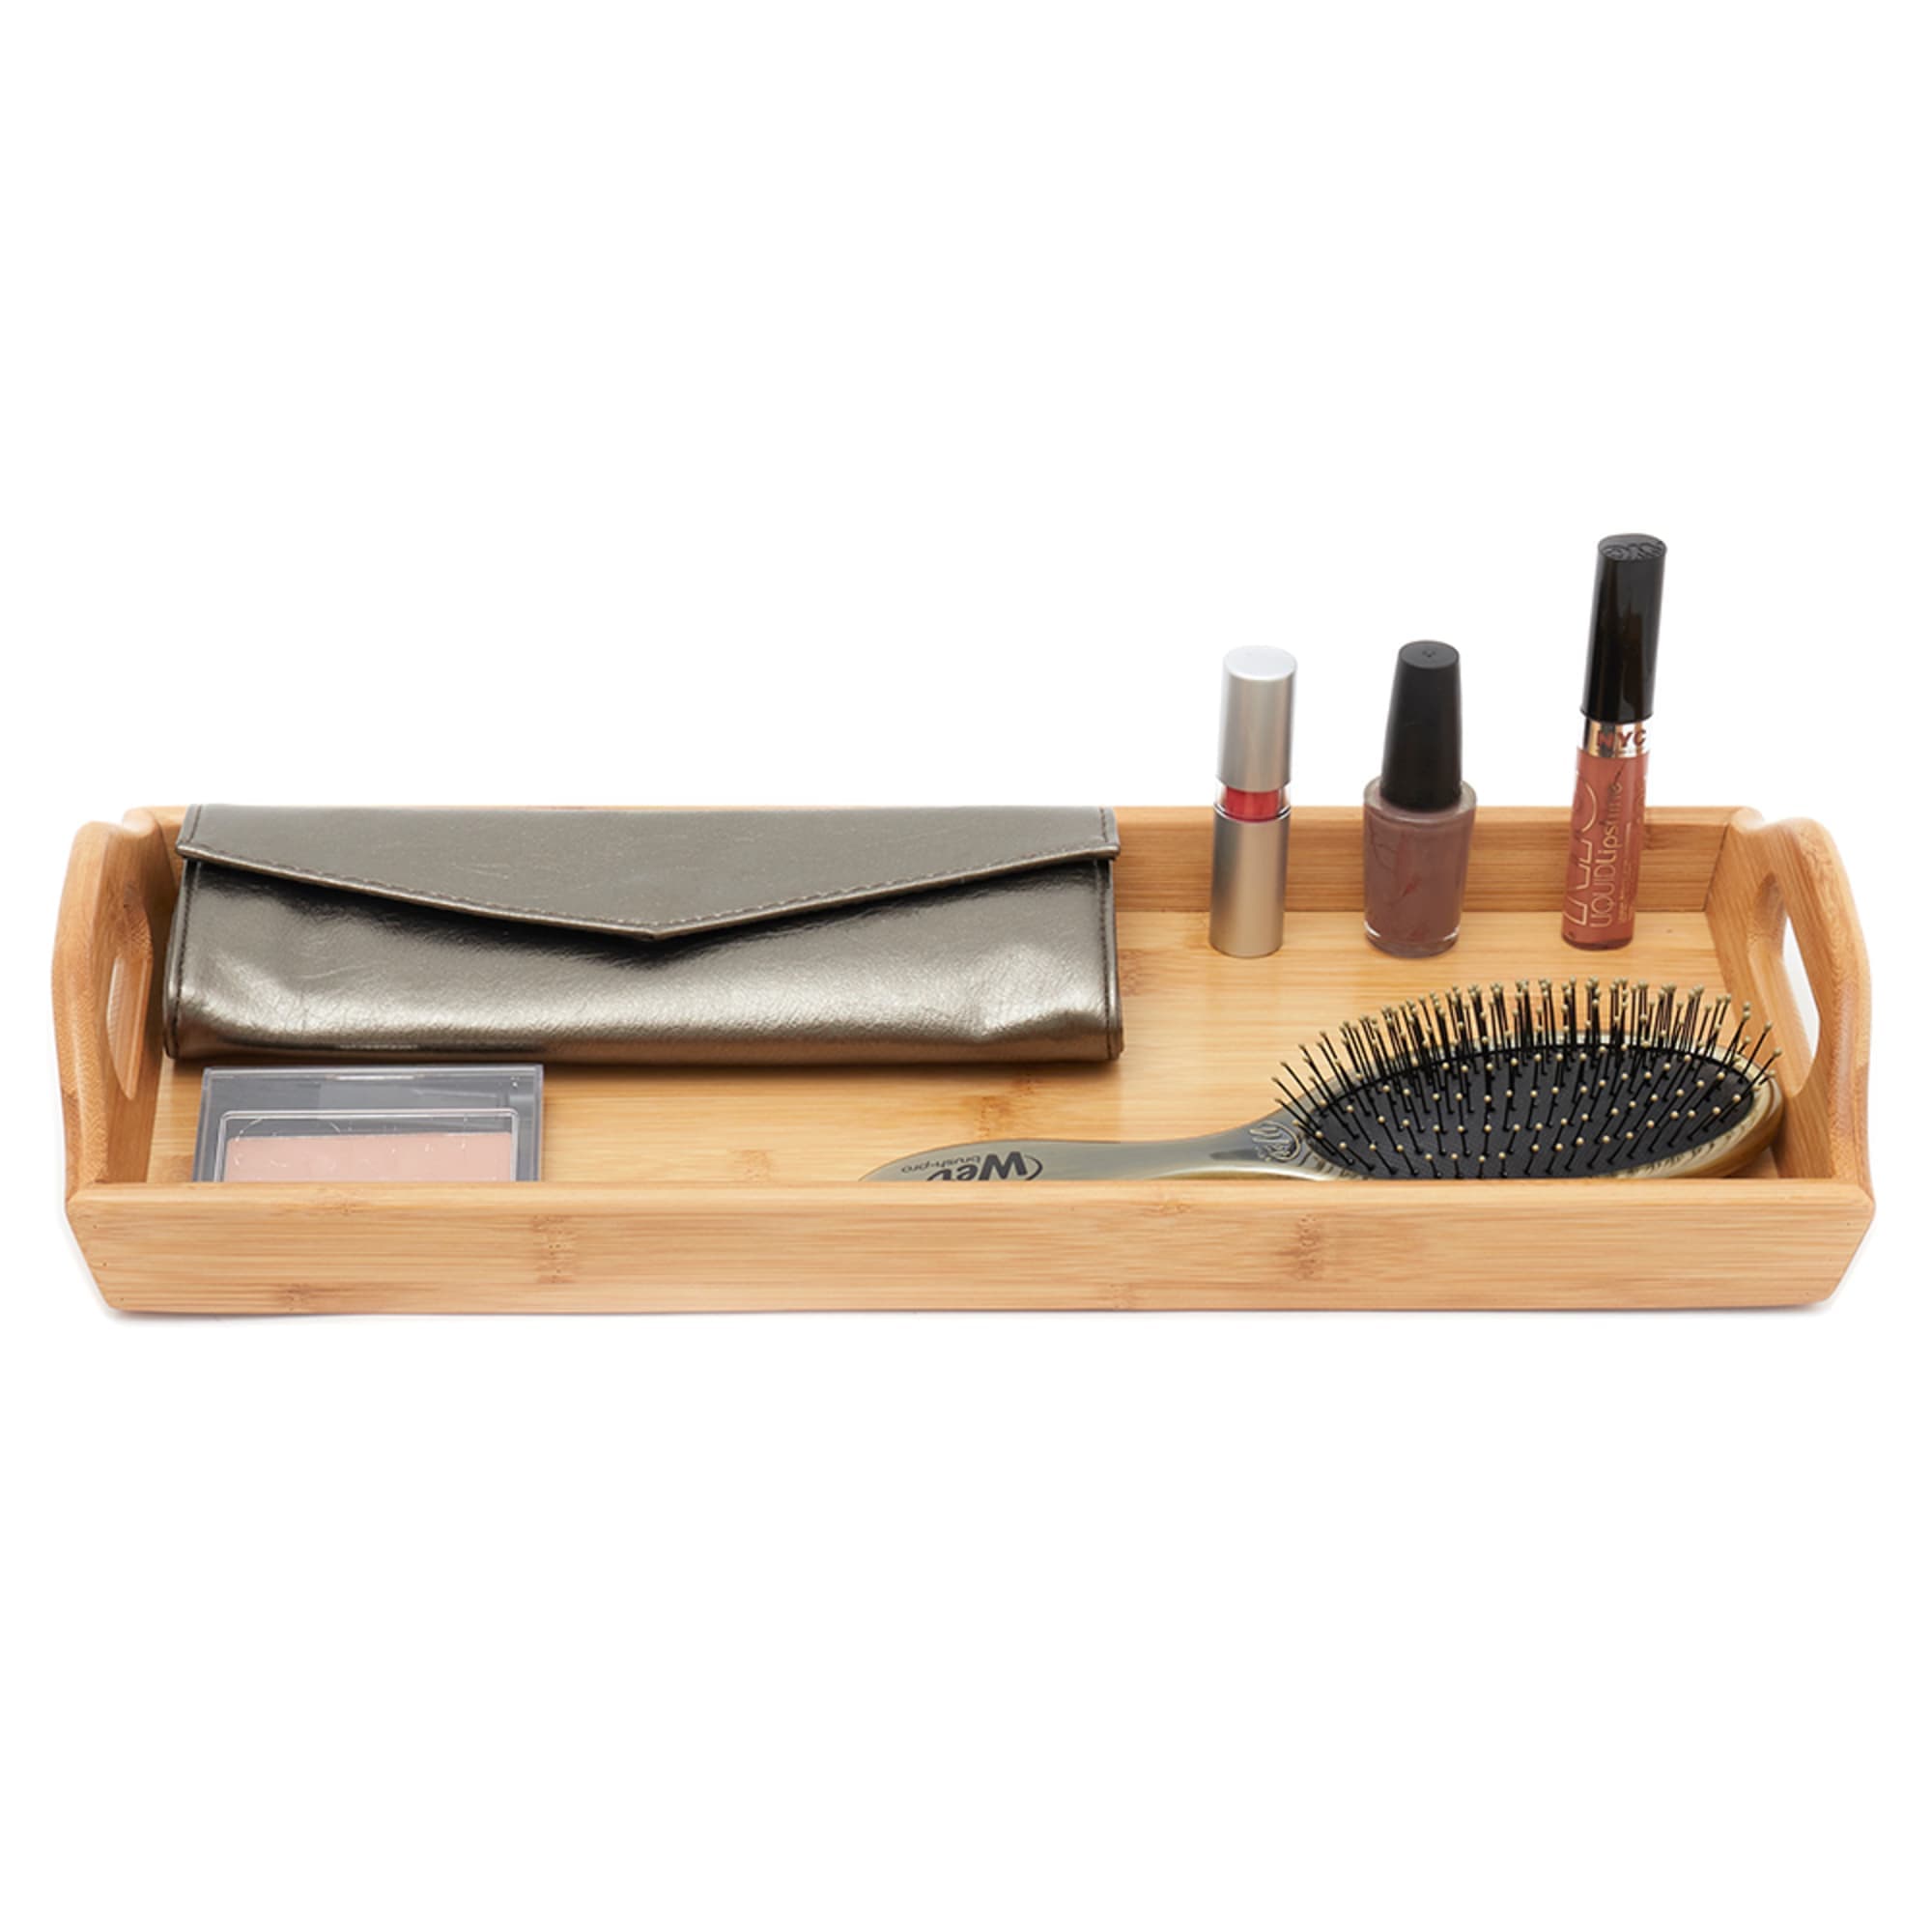 Home Basics Bamboo Bathroom Vanity Tray with Handles, Natural $8.00 EACH, CASE PACK OF 12